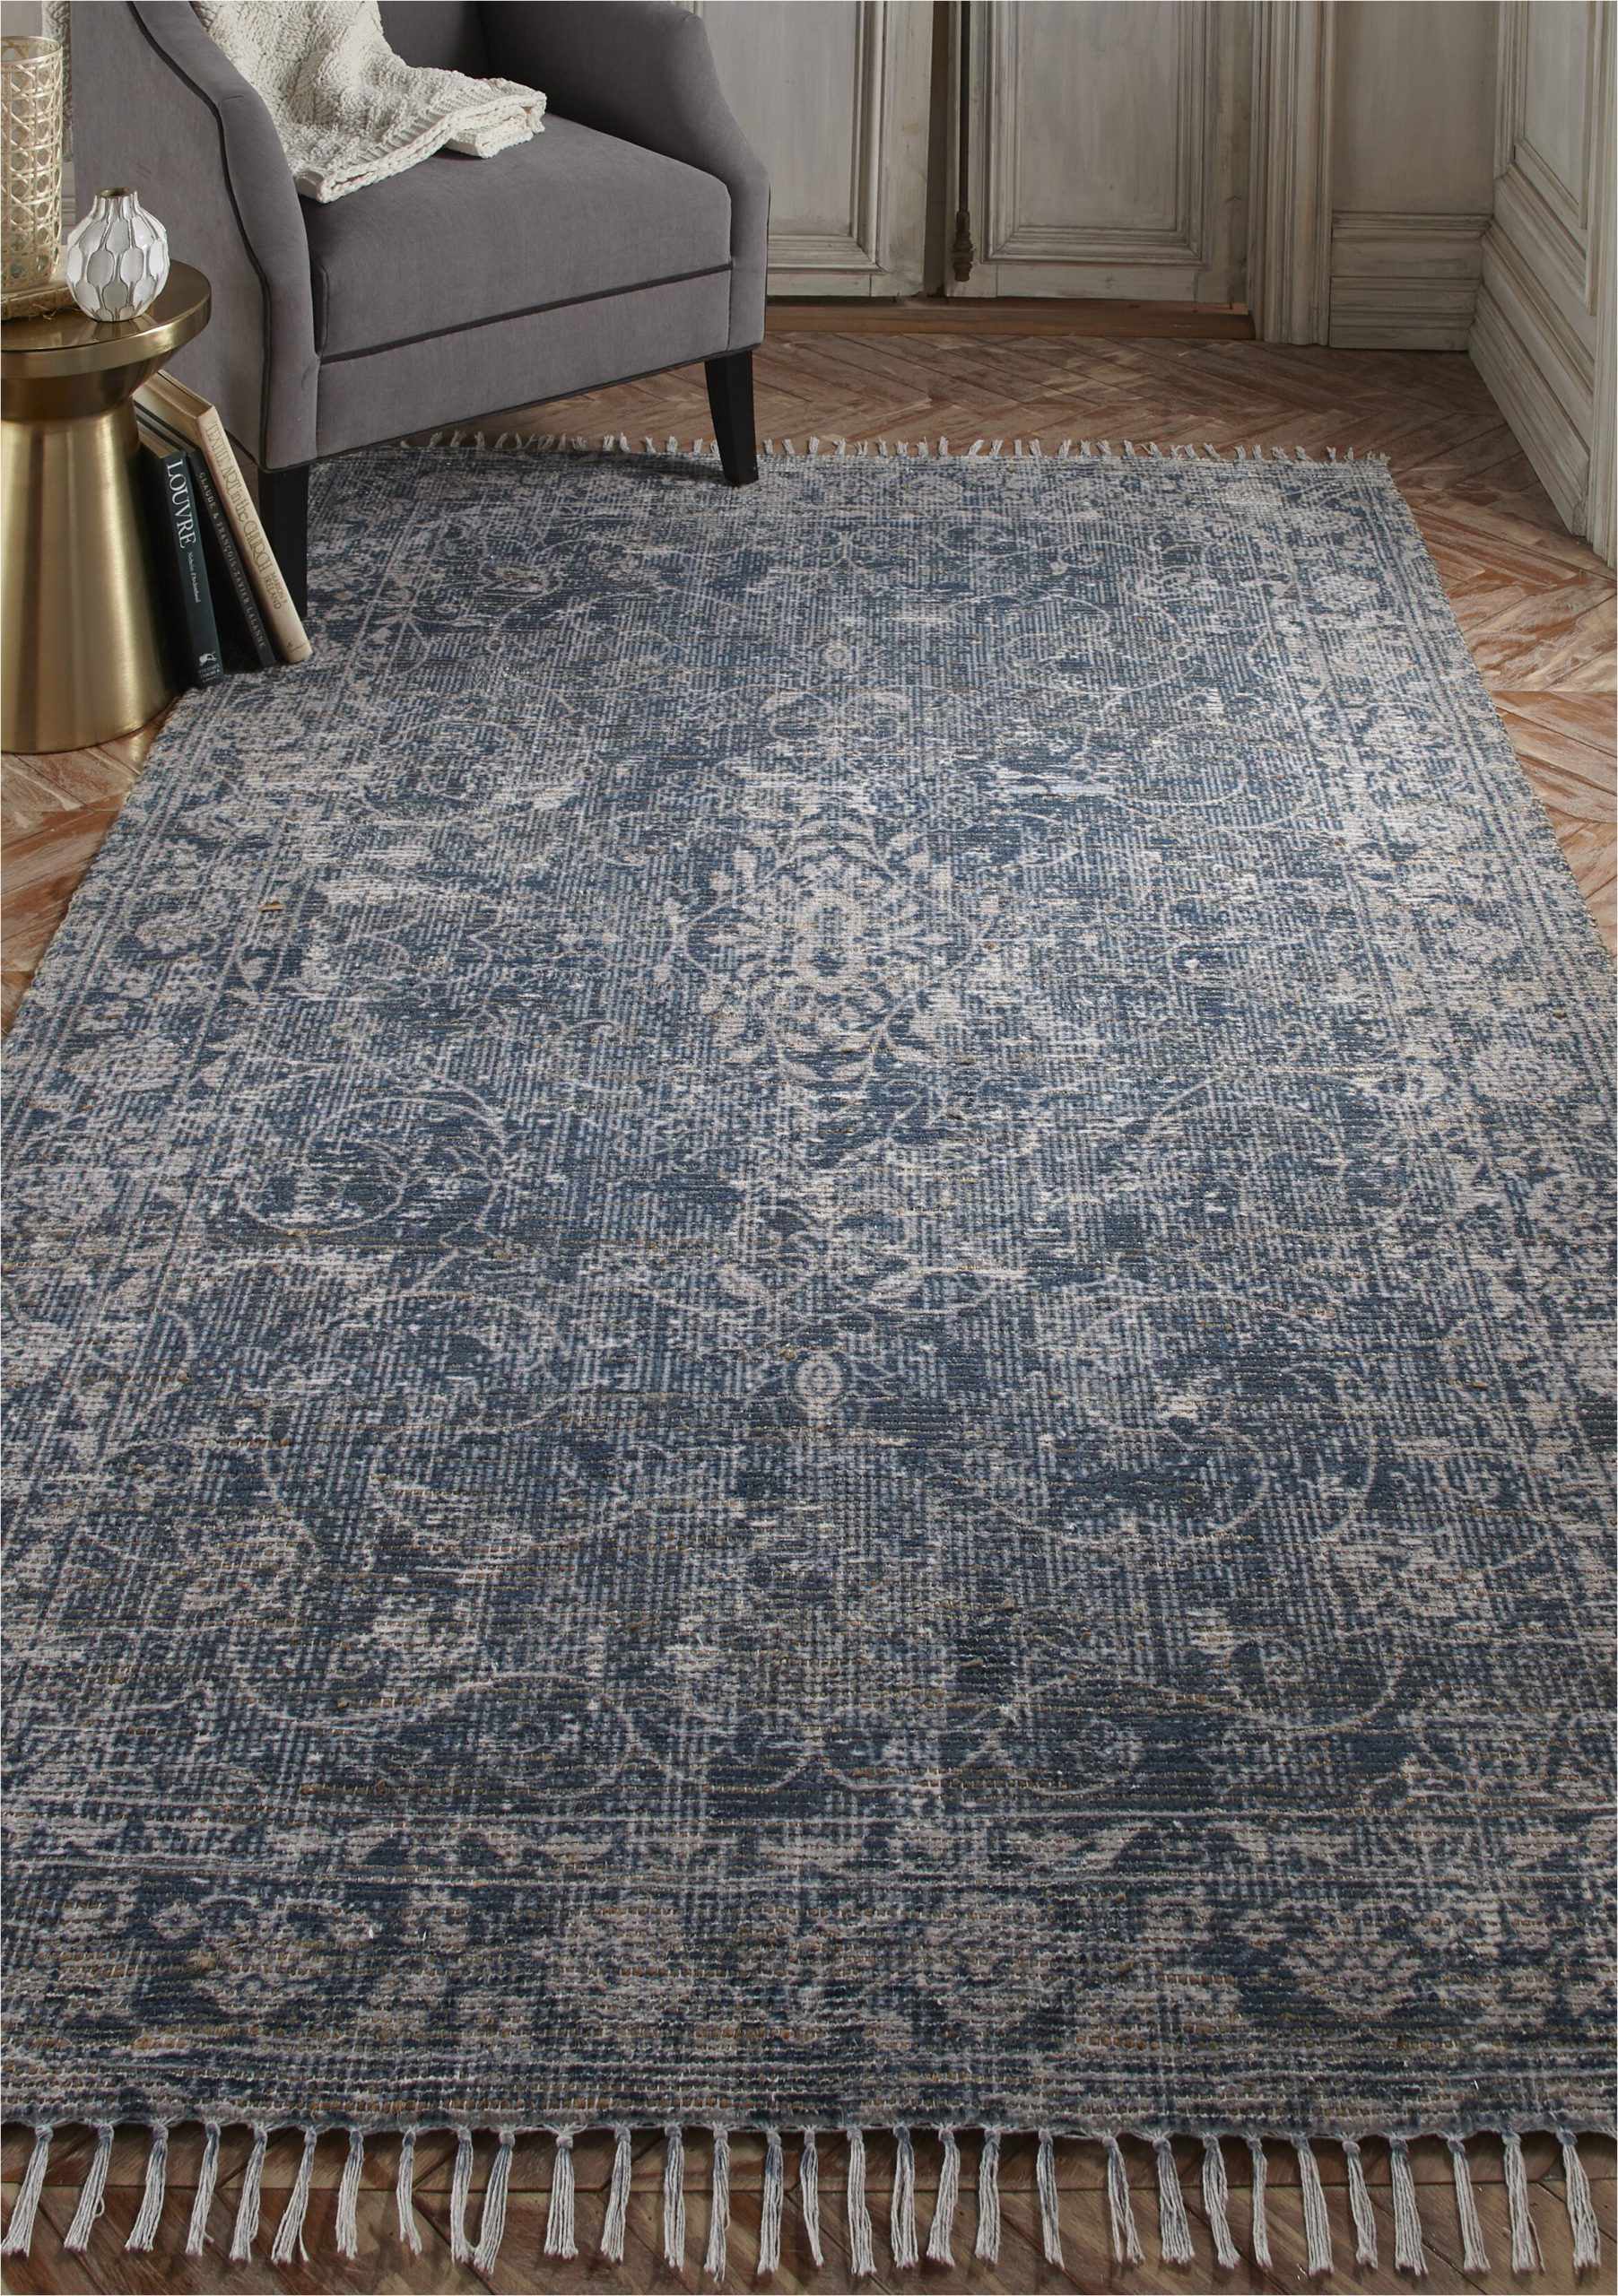 Hand Knotted Blue Rugs Myrick Hand Knotted Blue Tan area Rug